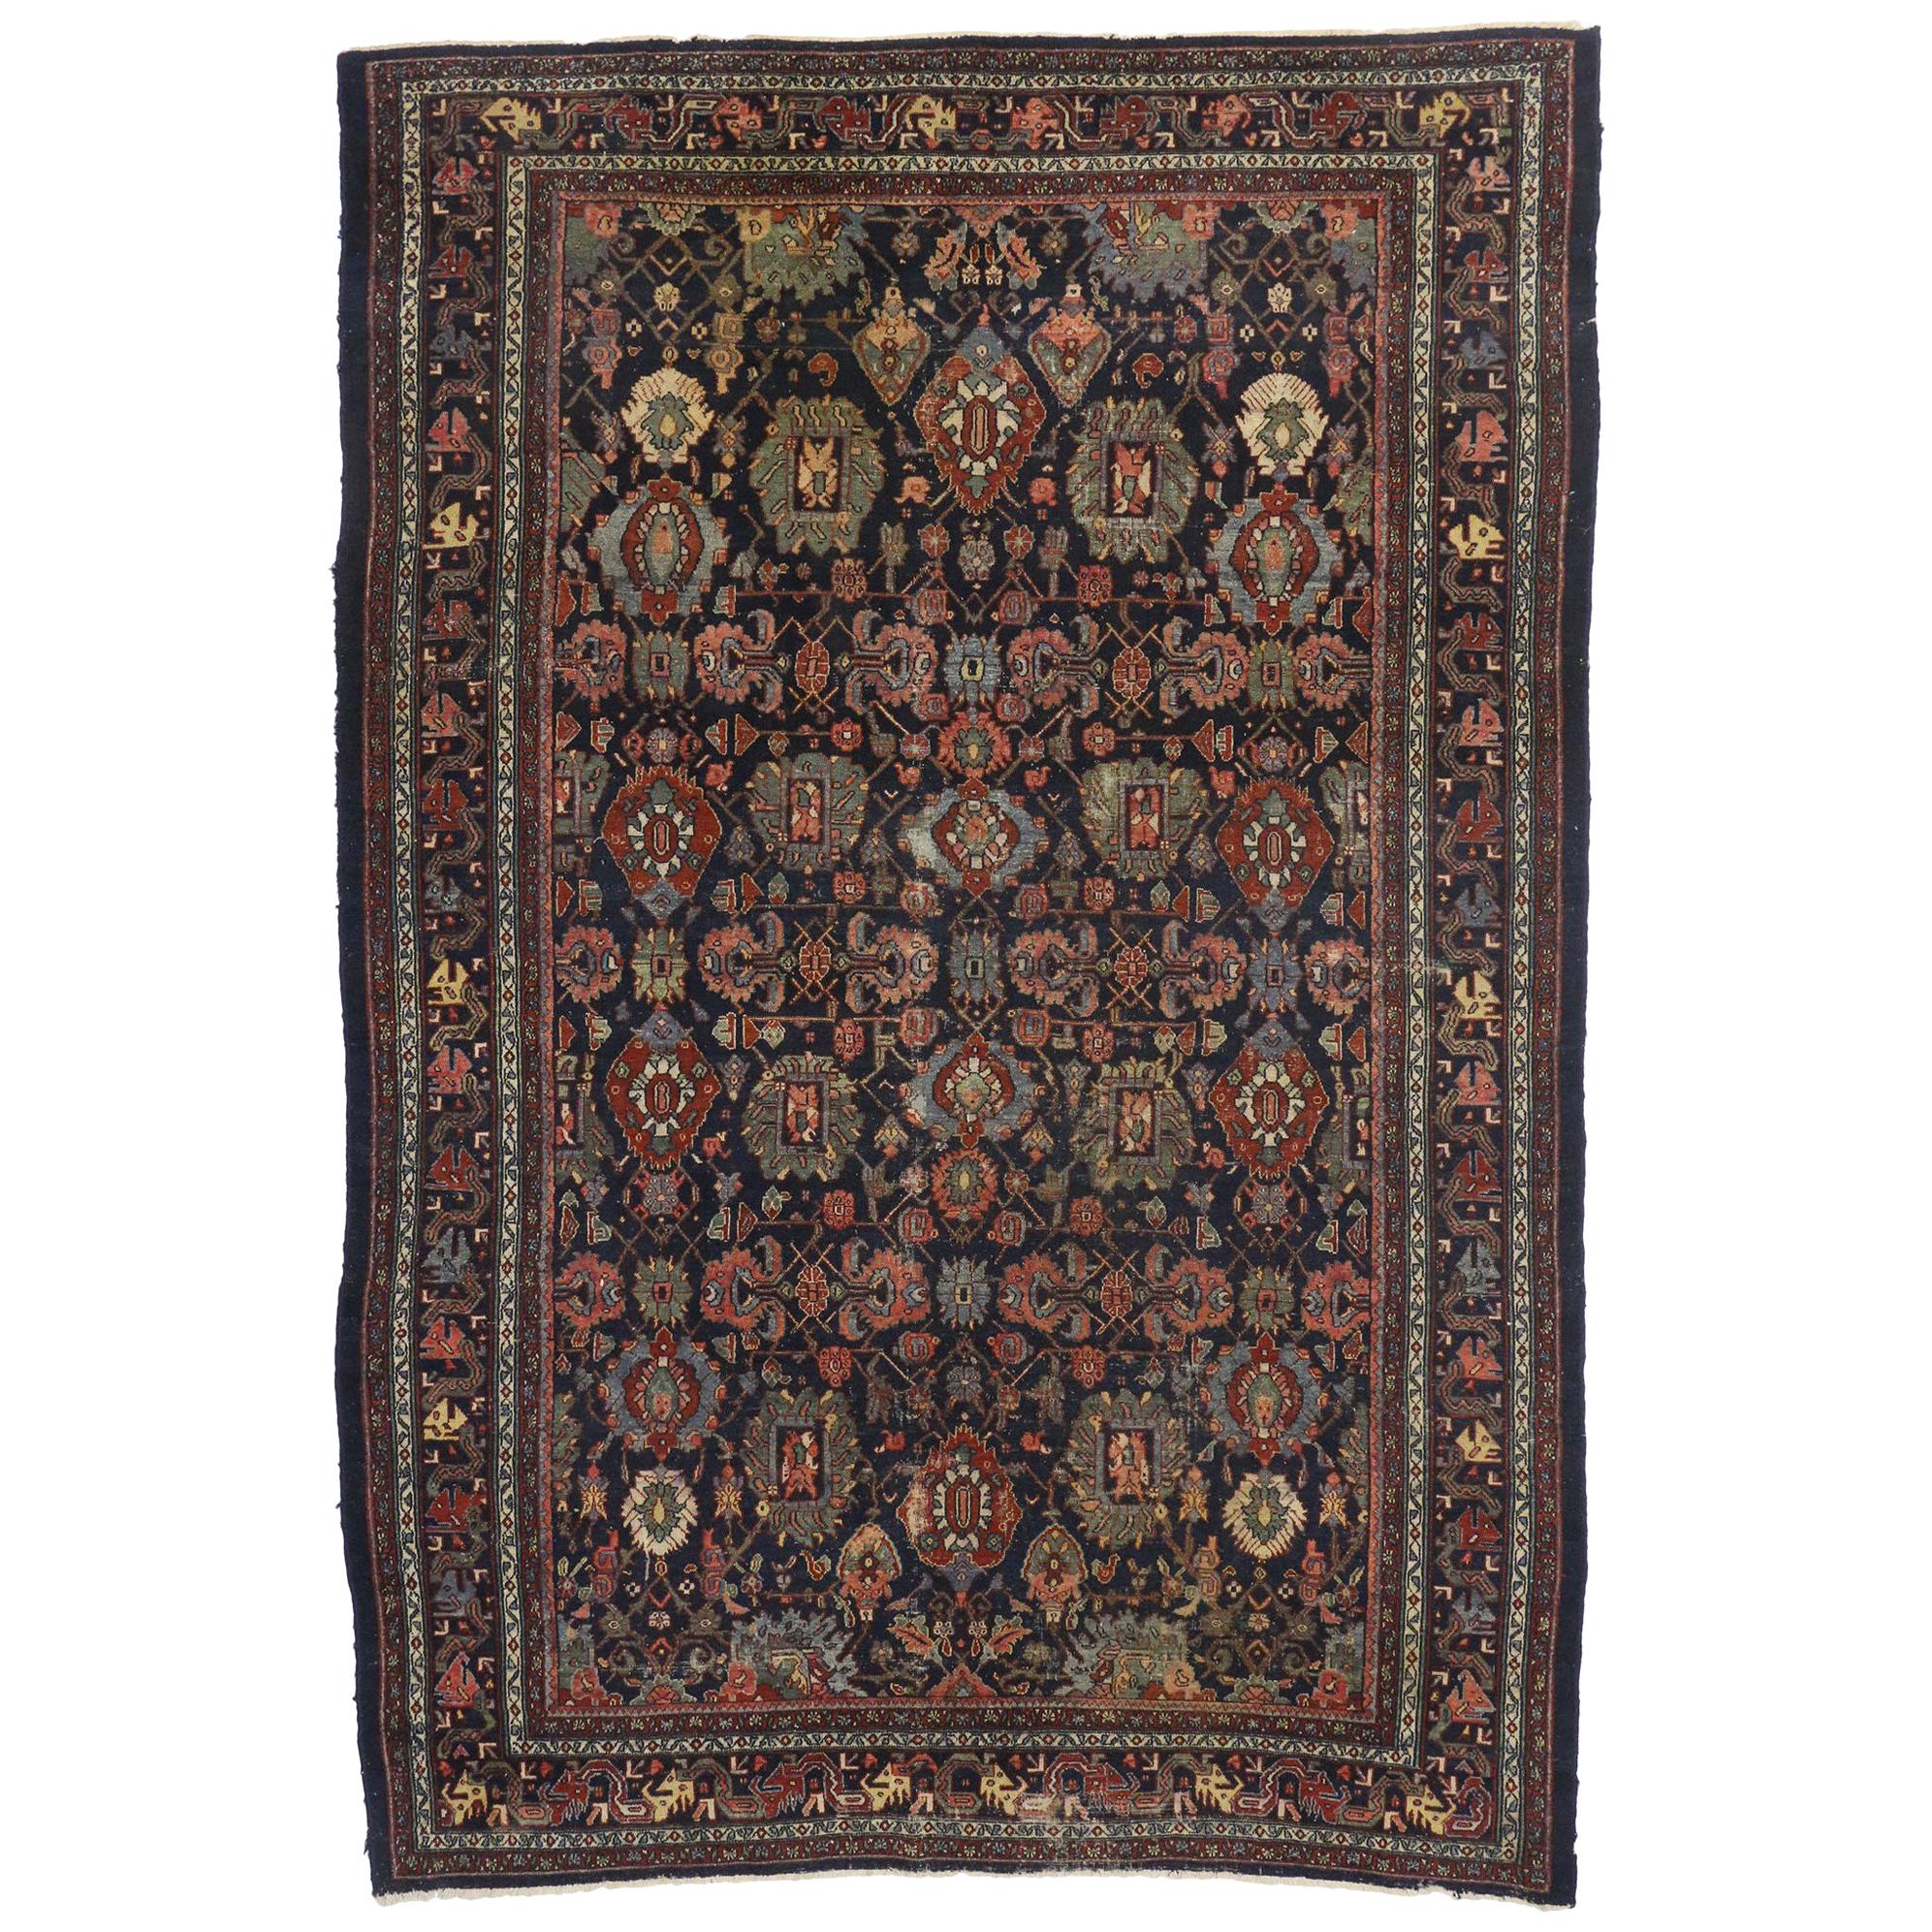 Antique Persian Bibikabad Area Rug with Dragon Vine Border and Traditional Style